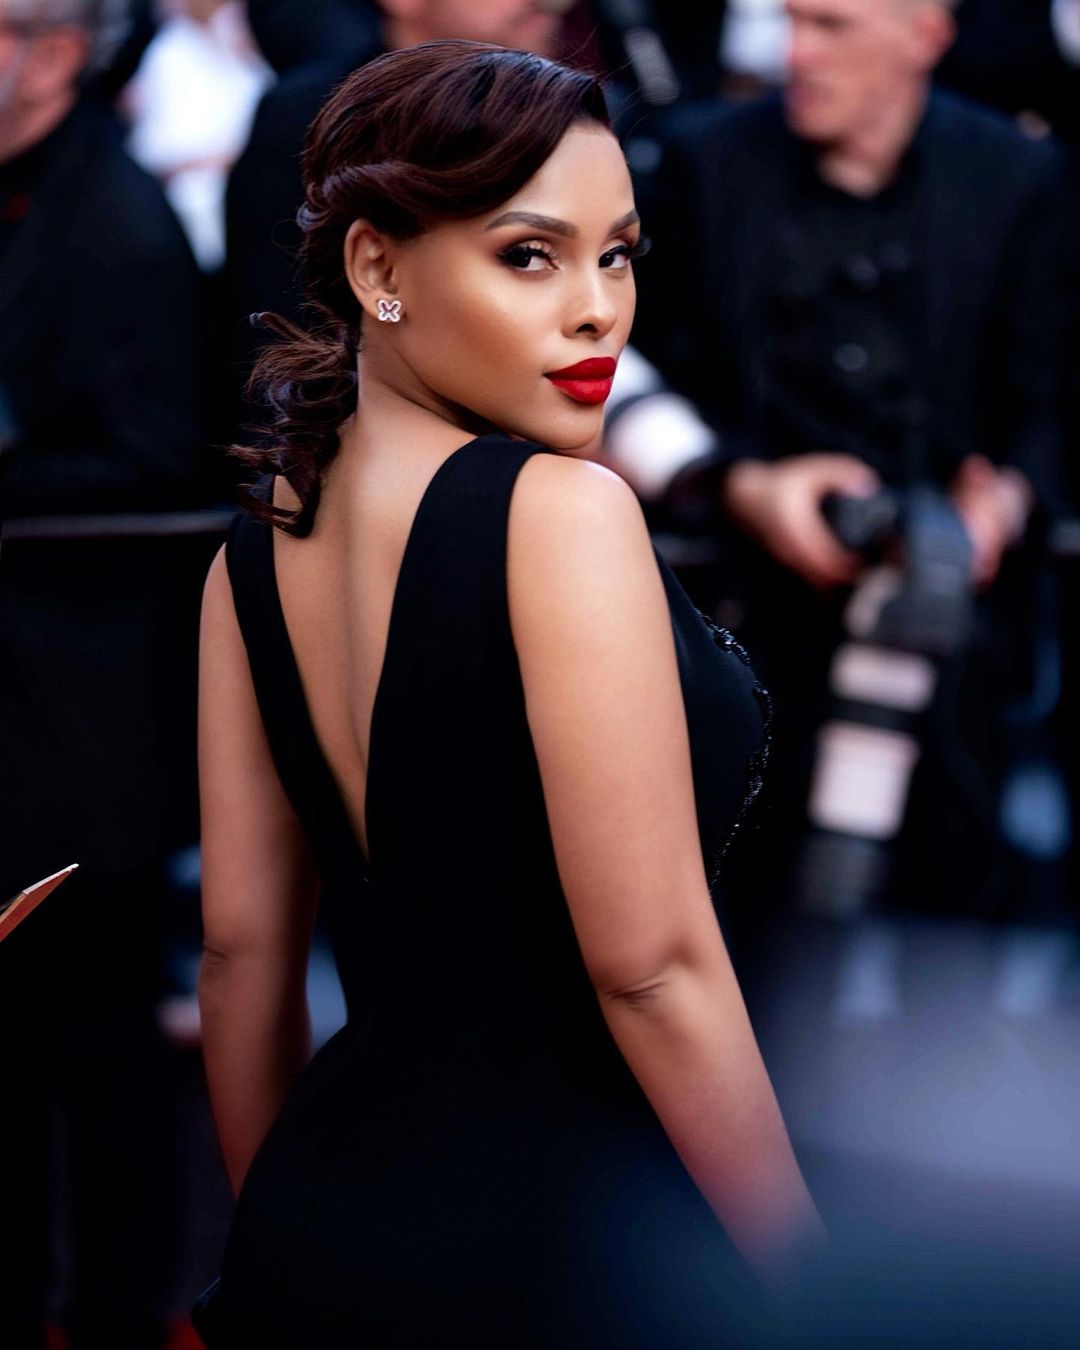 Influencer Kefilwe Mobote stuns the Cannes Film Festival 2022 red carpet